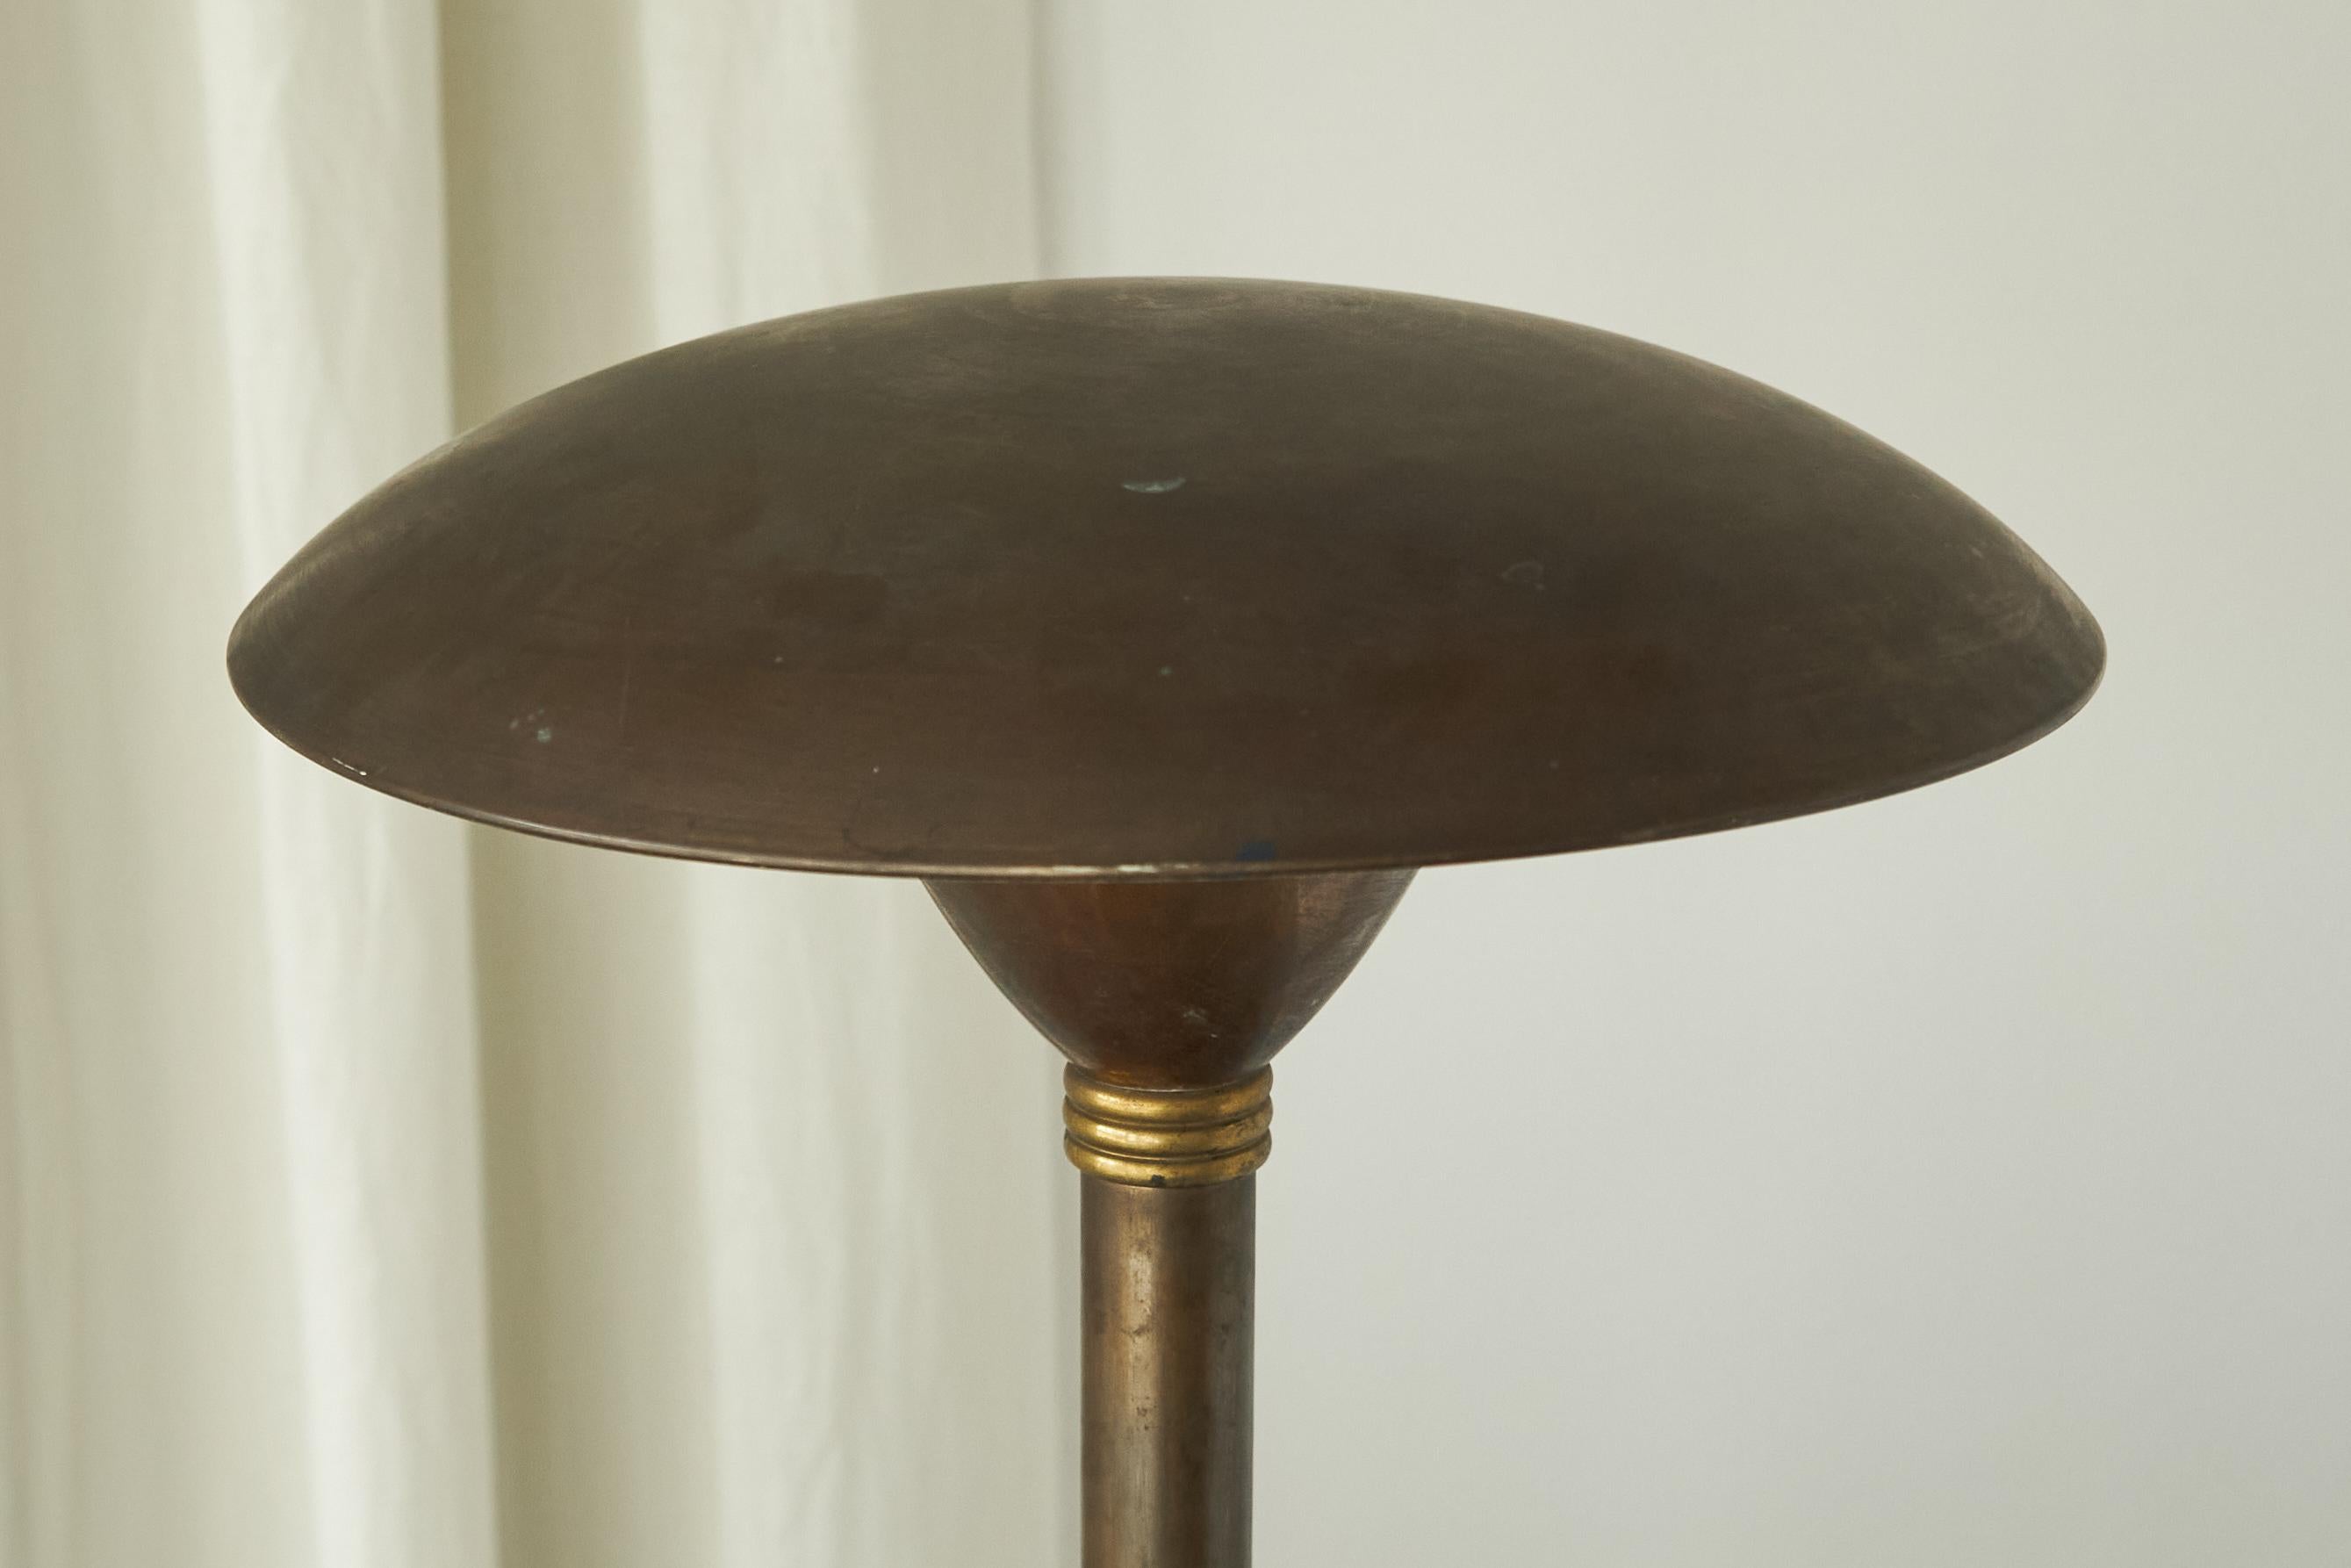 Large Art Deco Table Lamp in Patinated Brass, Italy, 1930s For Sale 1